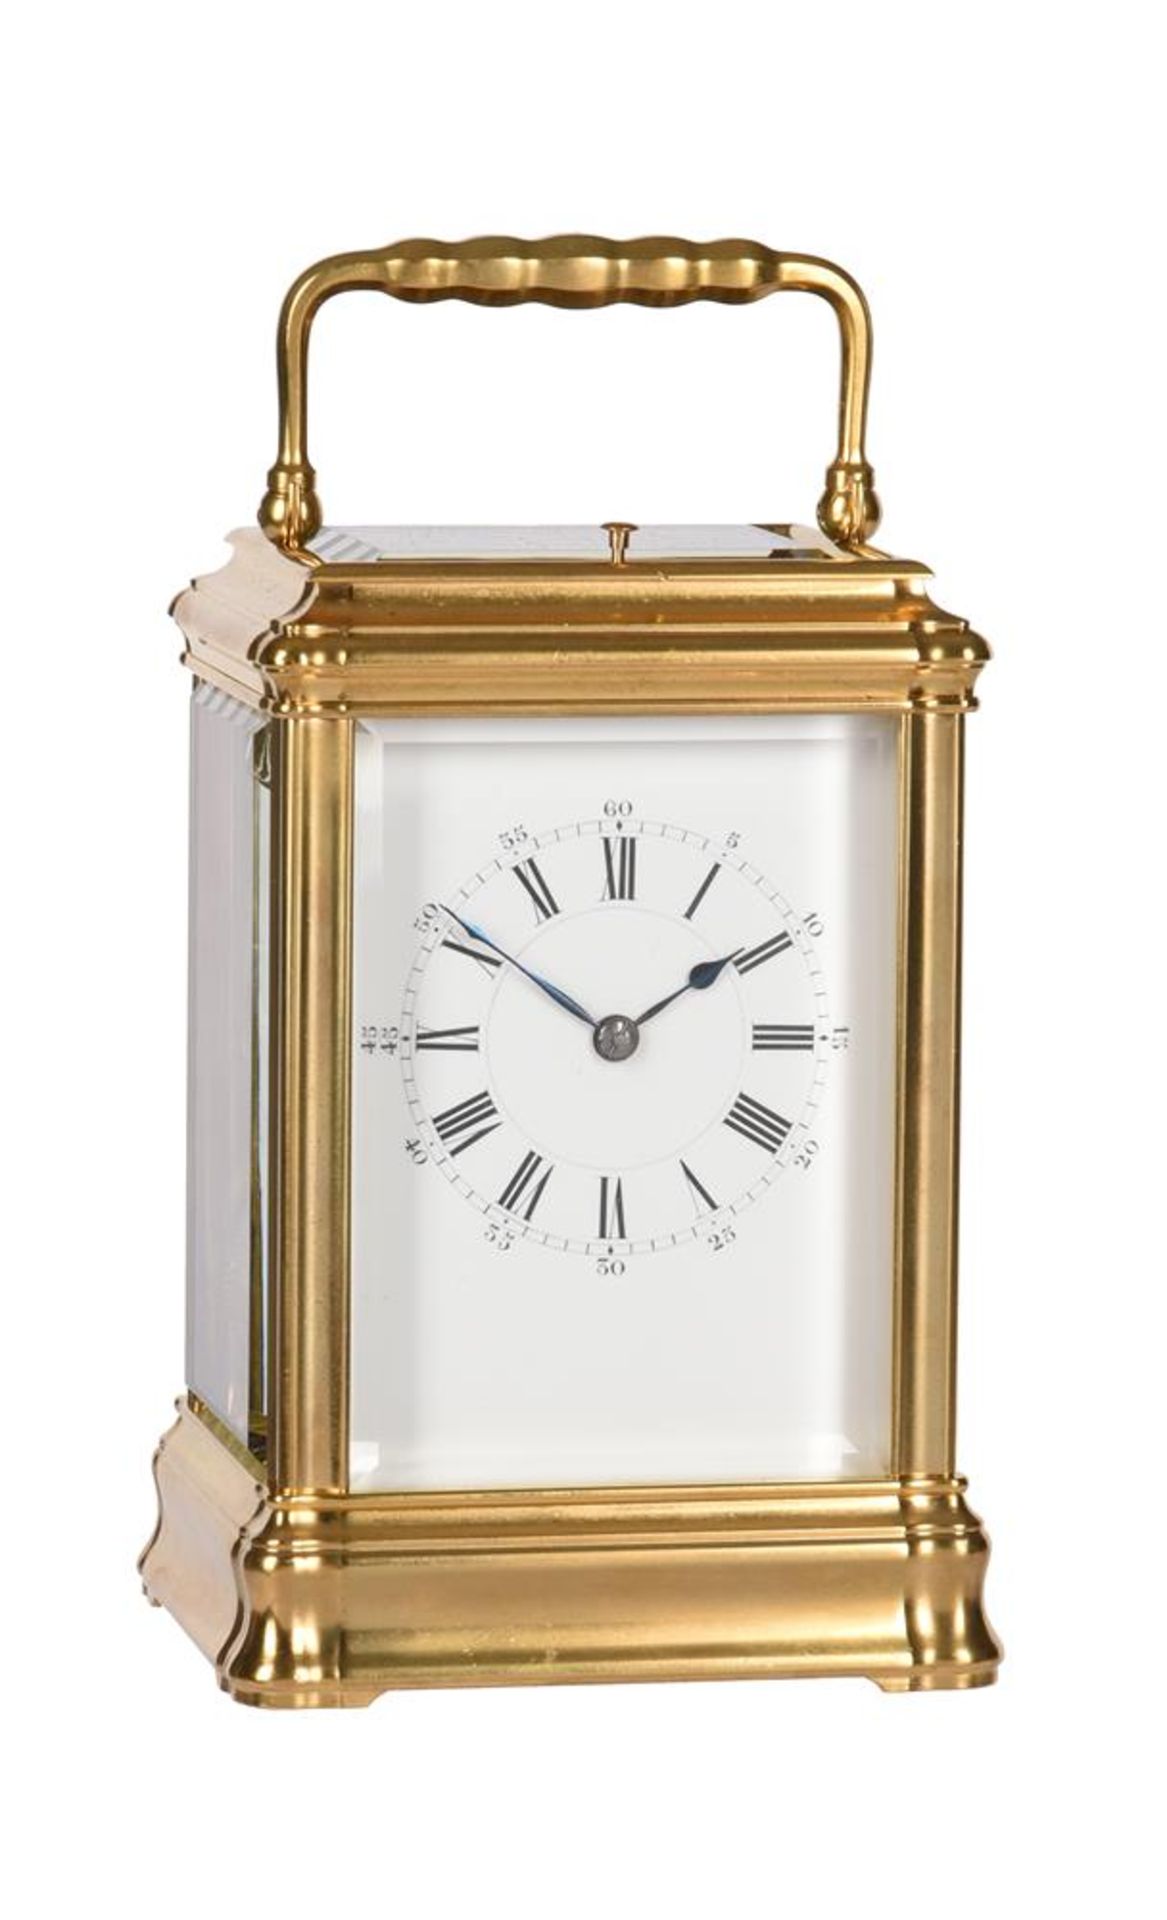 A FINE FRENCH GILT BRASS GORGE CASED GRANDE SONNERIE STRIKING CARRIAGE CLOCK - Image 6 of 6